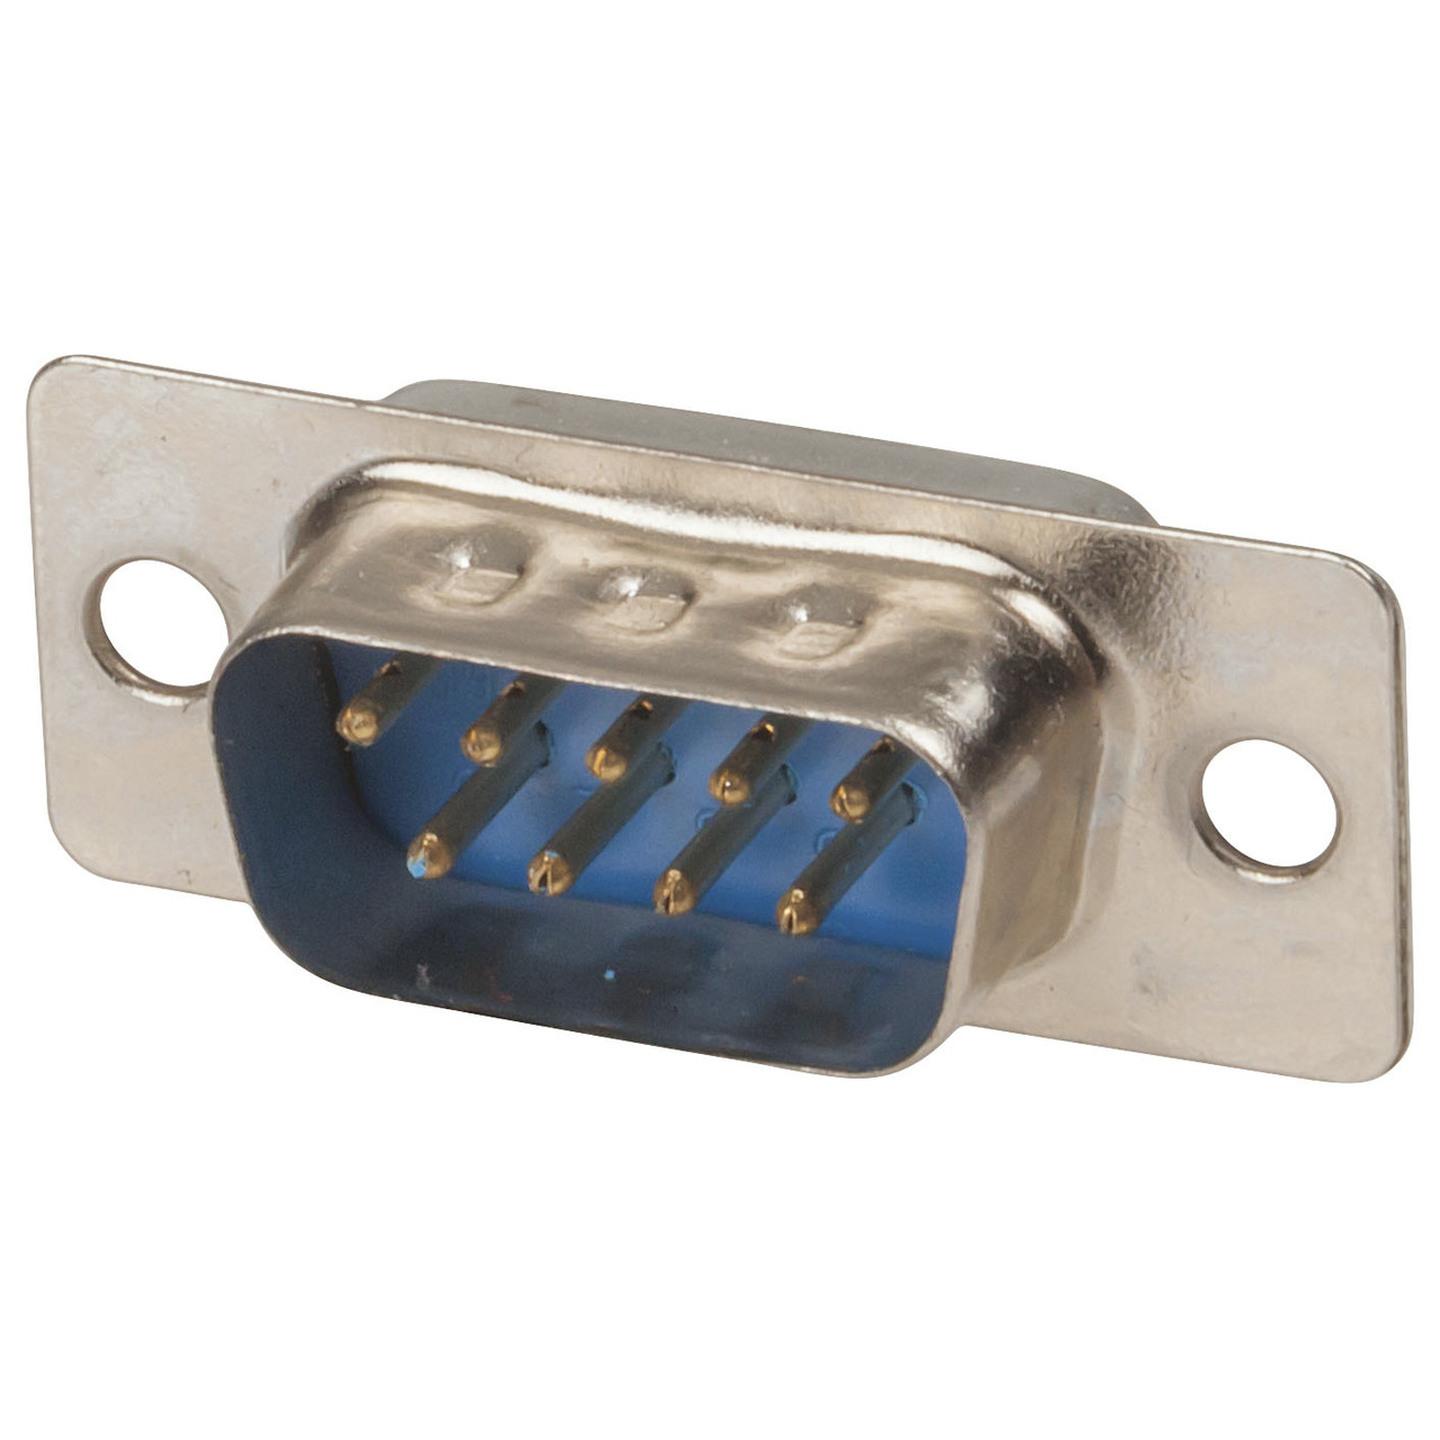 DB9 Male Connector - Solder